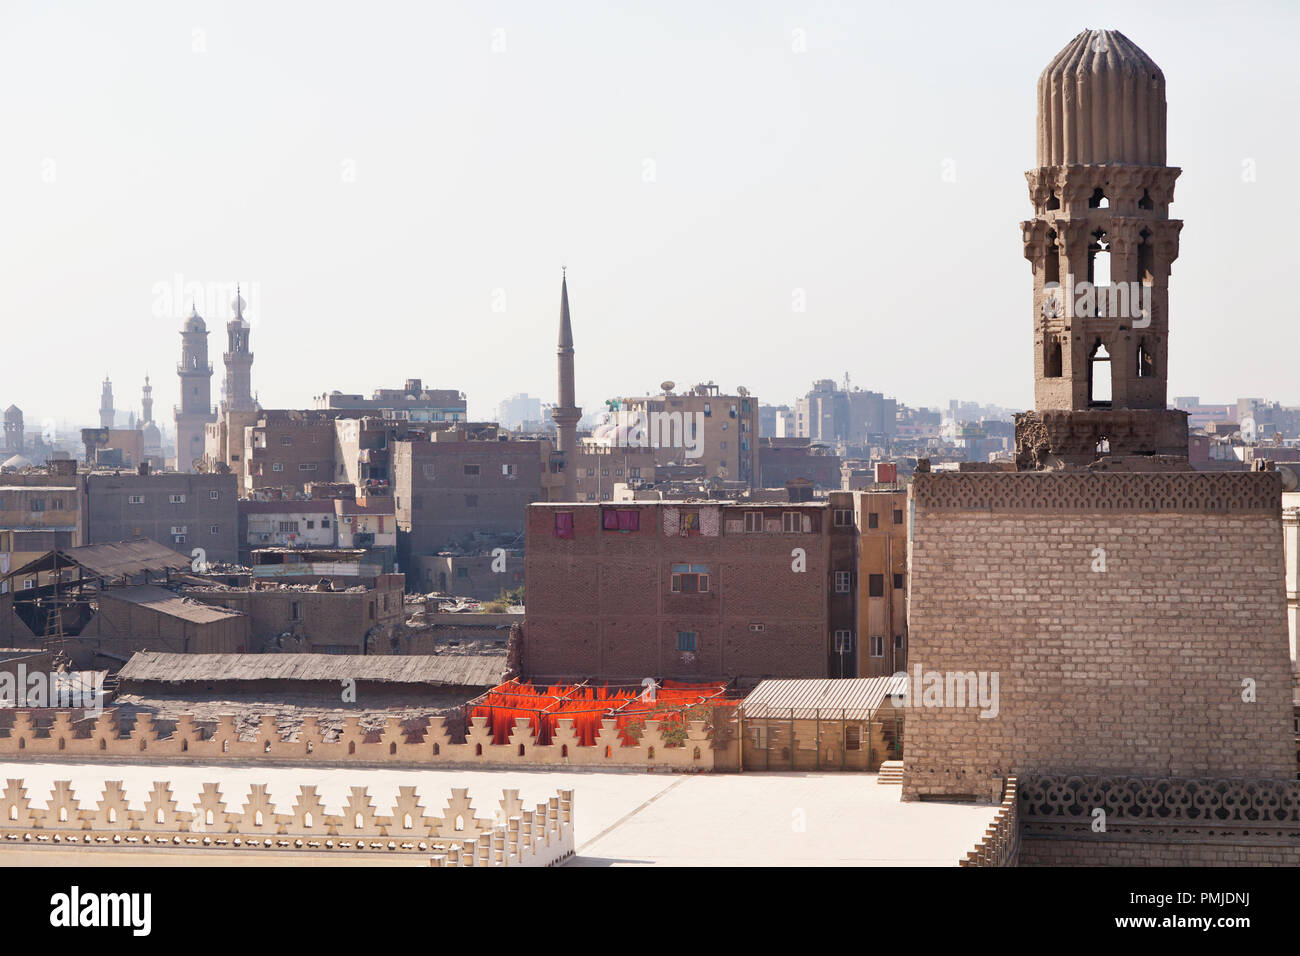 View of the old city from the height of the minaret of Al-Hakim Mosque of Cairo, Egypt Stock Photo